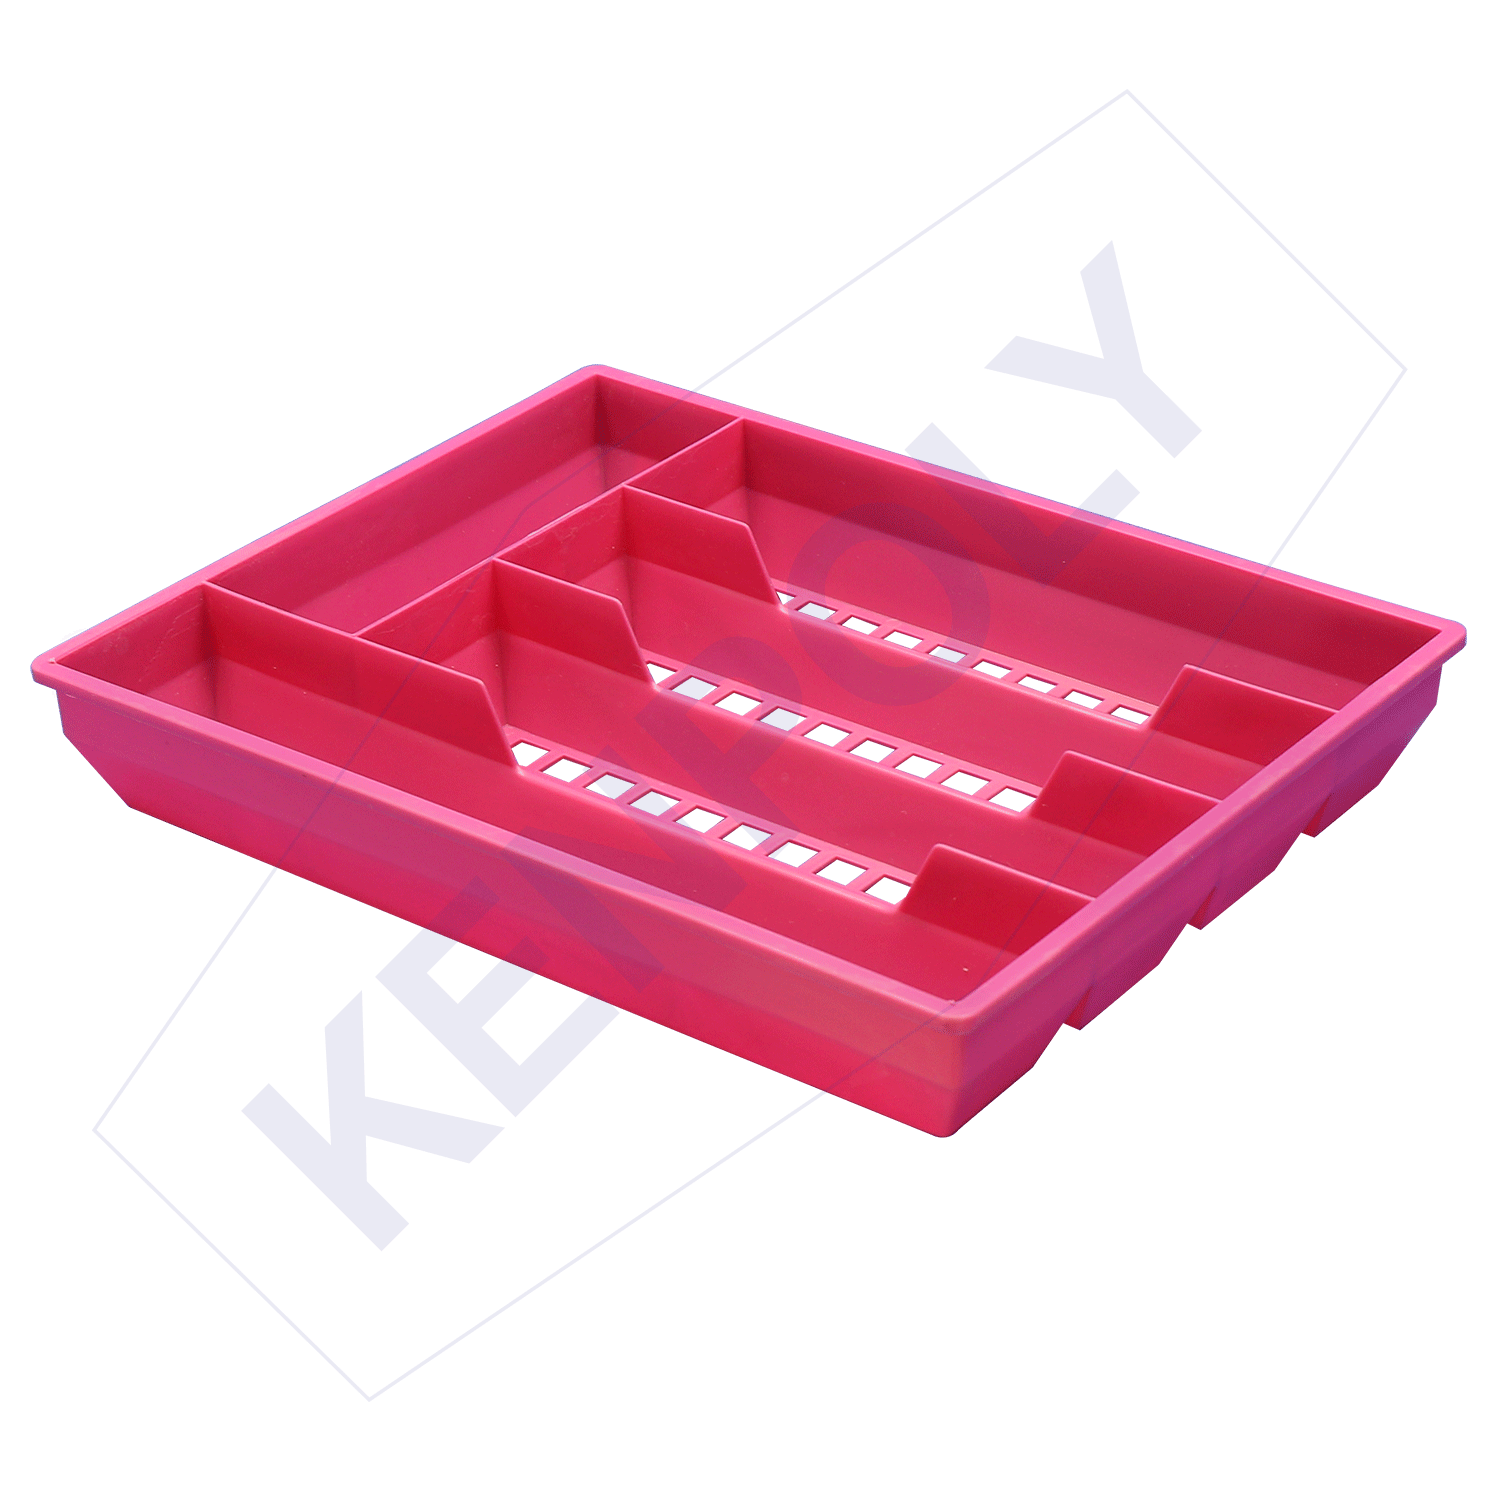 https://kenpoly.com/wp-content/uploads/2016/04/Cutlery-Tray.gif